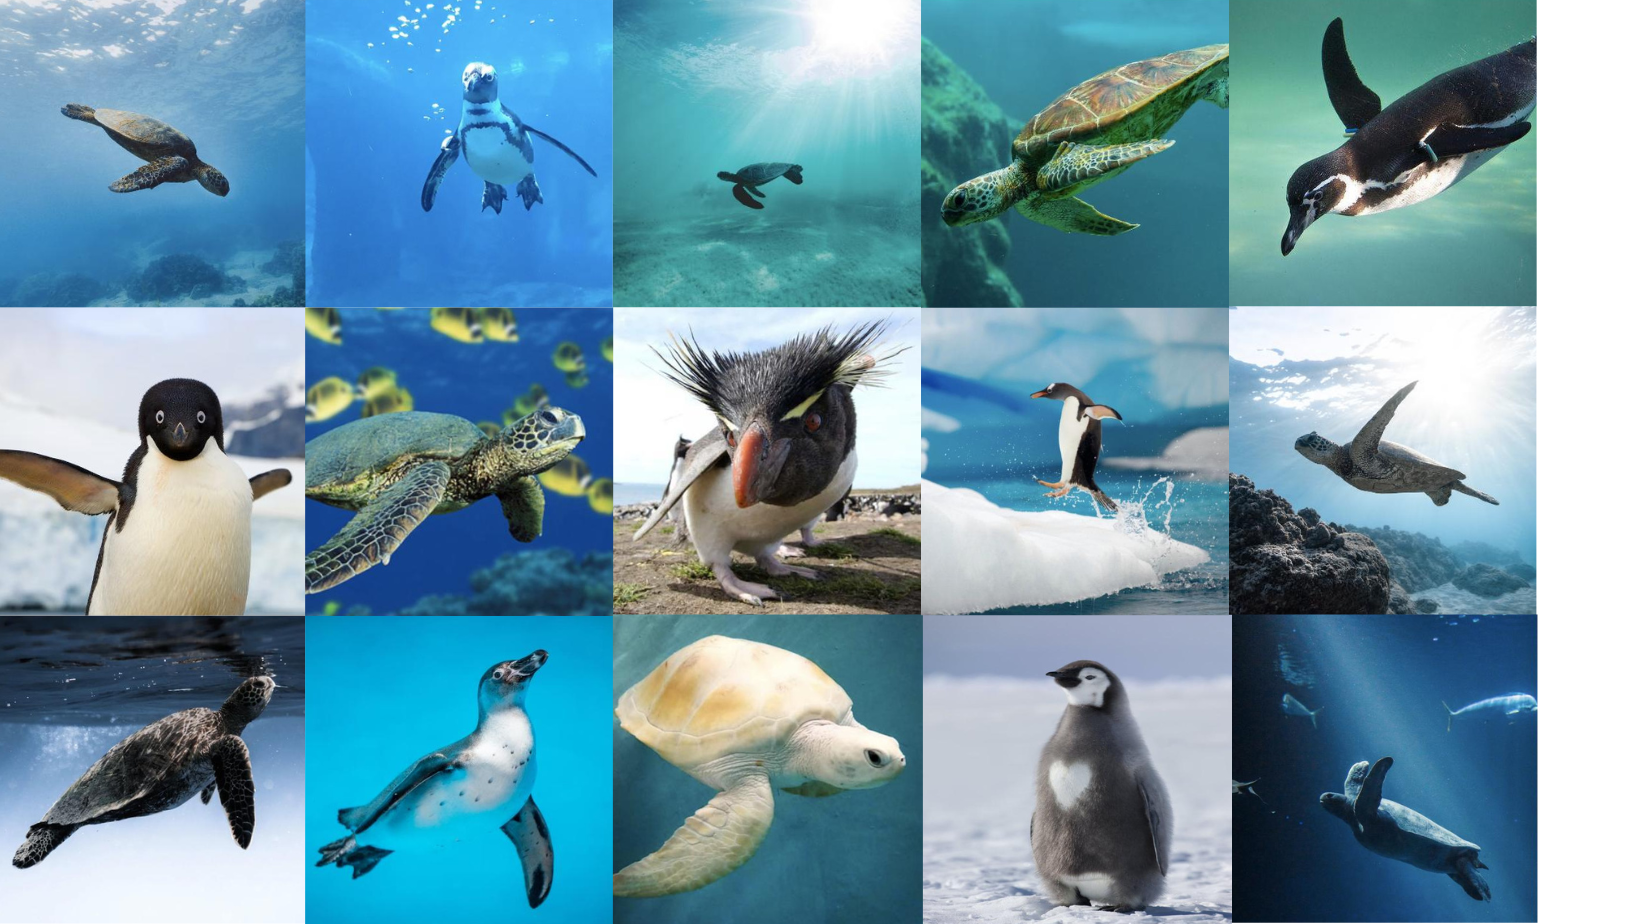 Example images from the penguin+turtles dataset